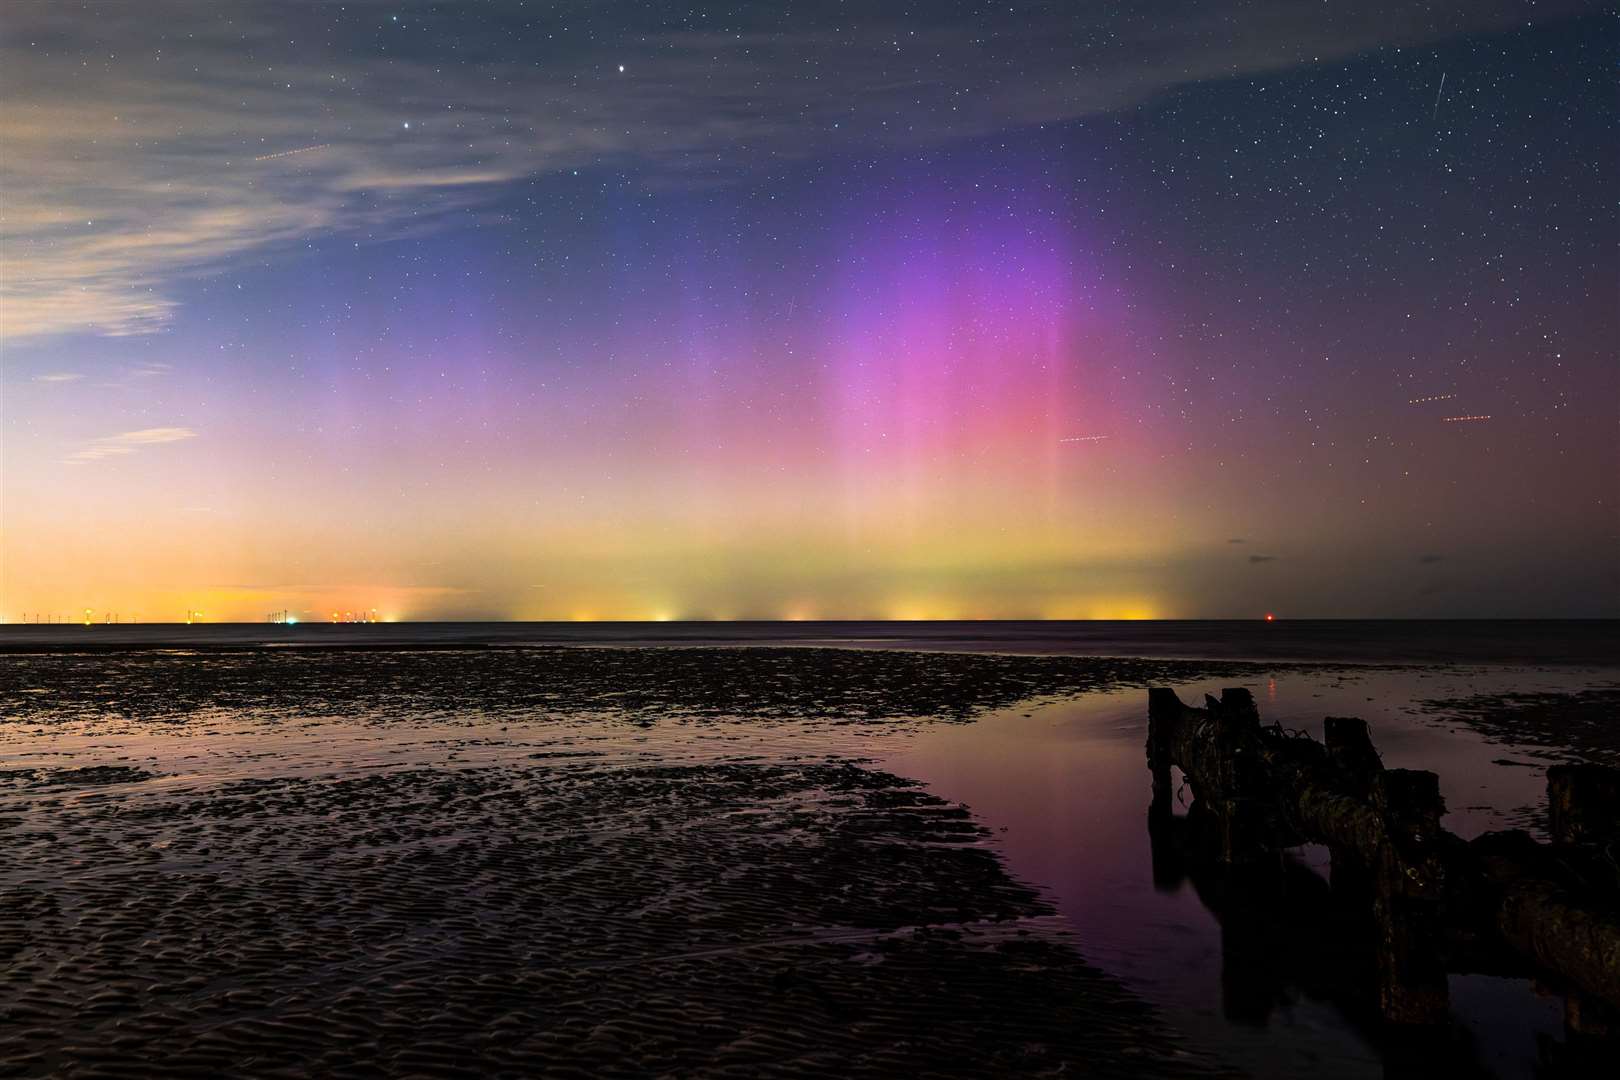 Chris Cork from Maidstone took this image of the Northern Lights at Reculver Beach in Herne Bay, he stayed up into the wee hours editing the pic. Photo: Chris Cork